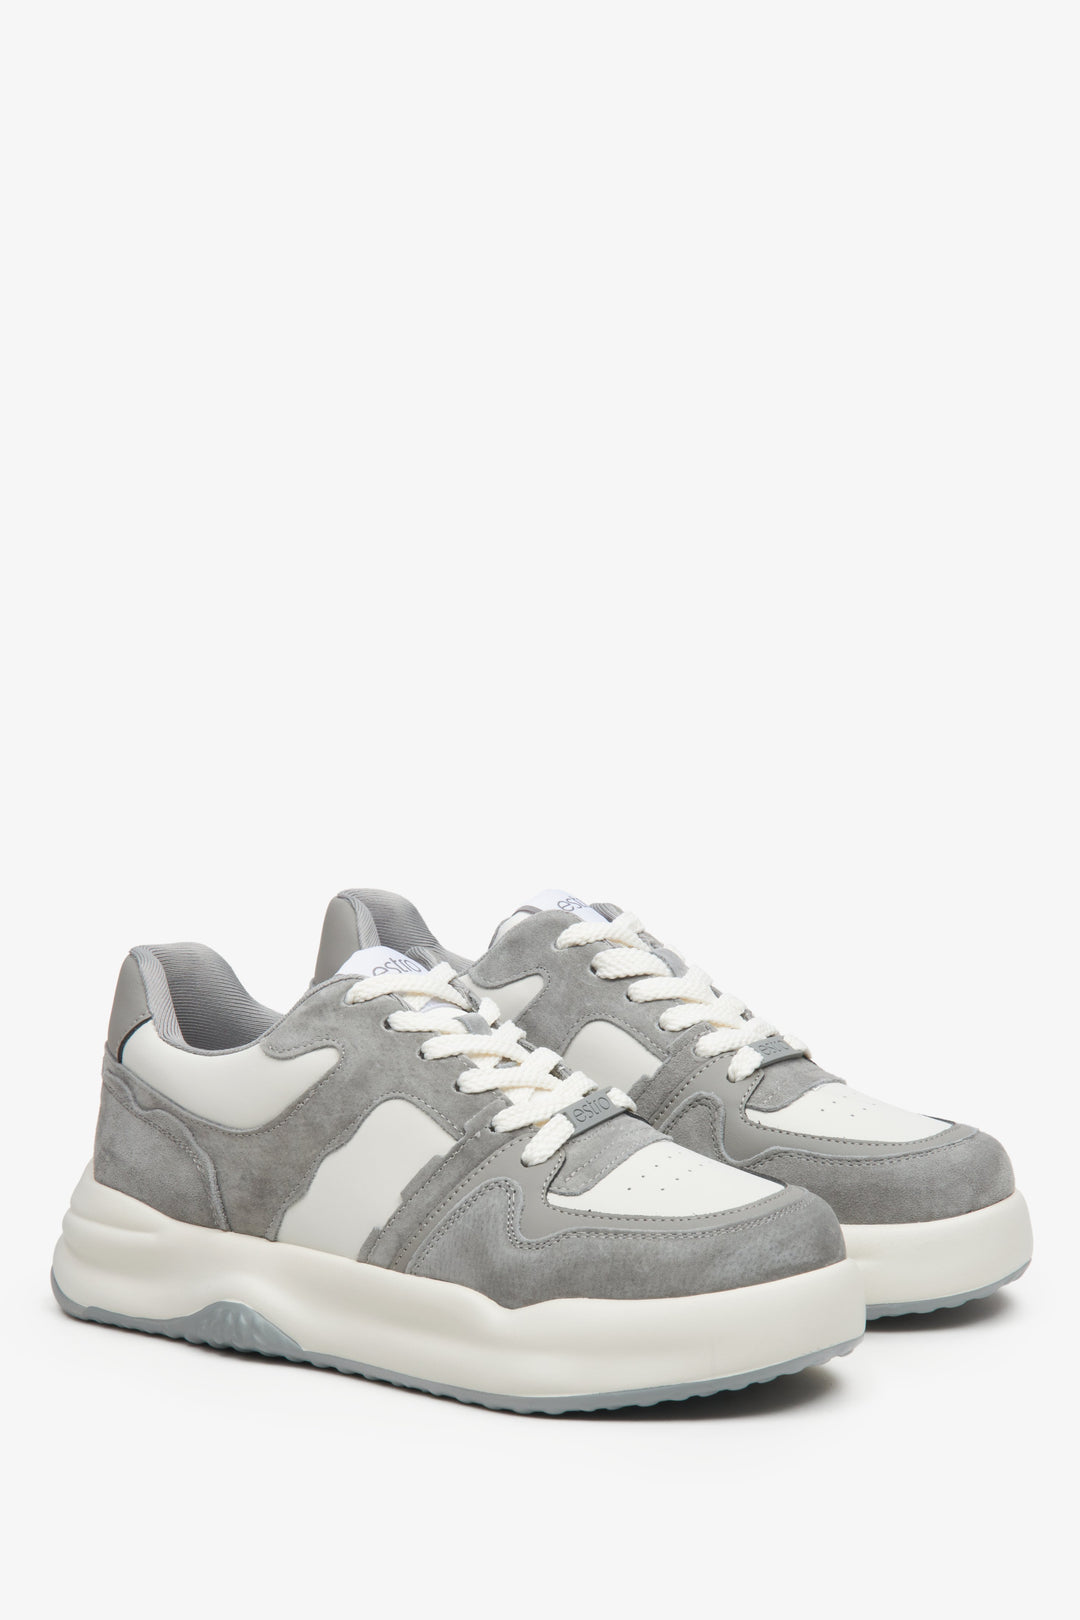 Women's casual sneakers in grey and white Estro - presentation of a shoe toe and sideline.